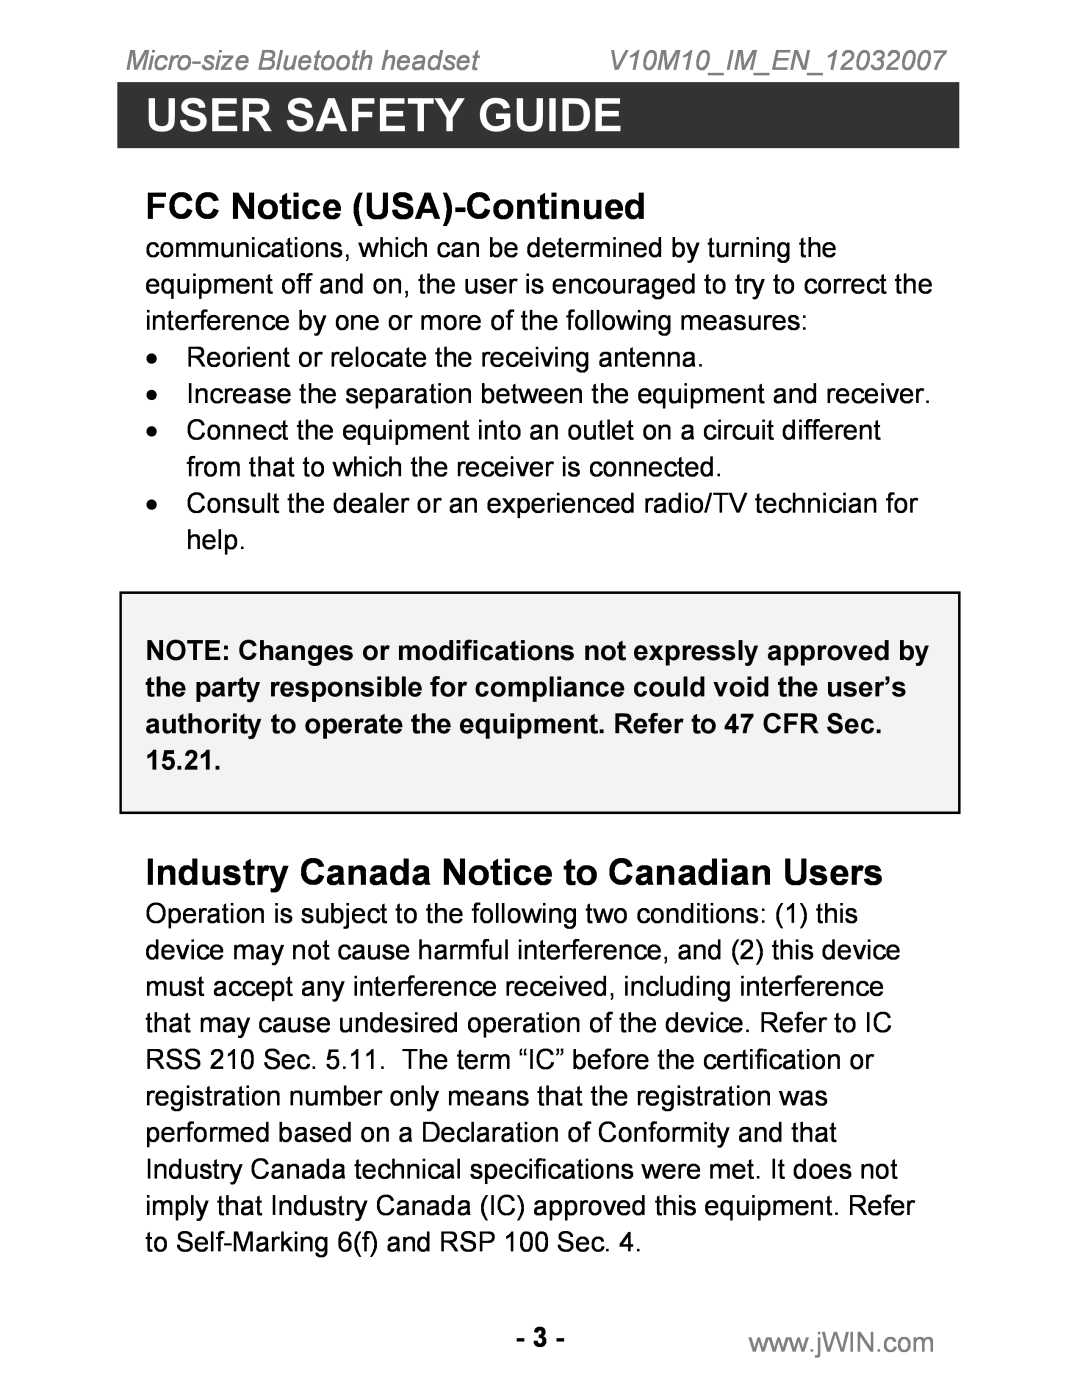 Jwin JB-TH210 instruction manual FCC Notice USA-Continued, Industry Canada Notice to Canadian Users, User Safety Guide 